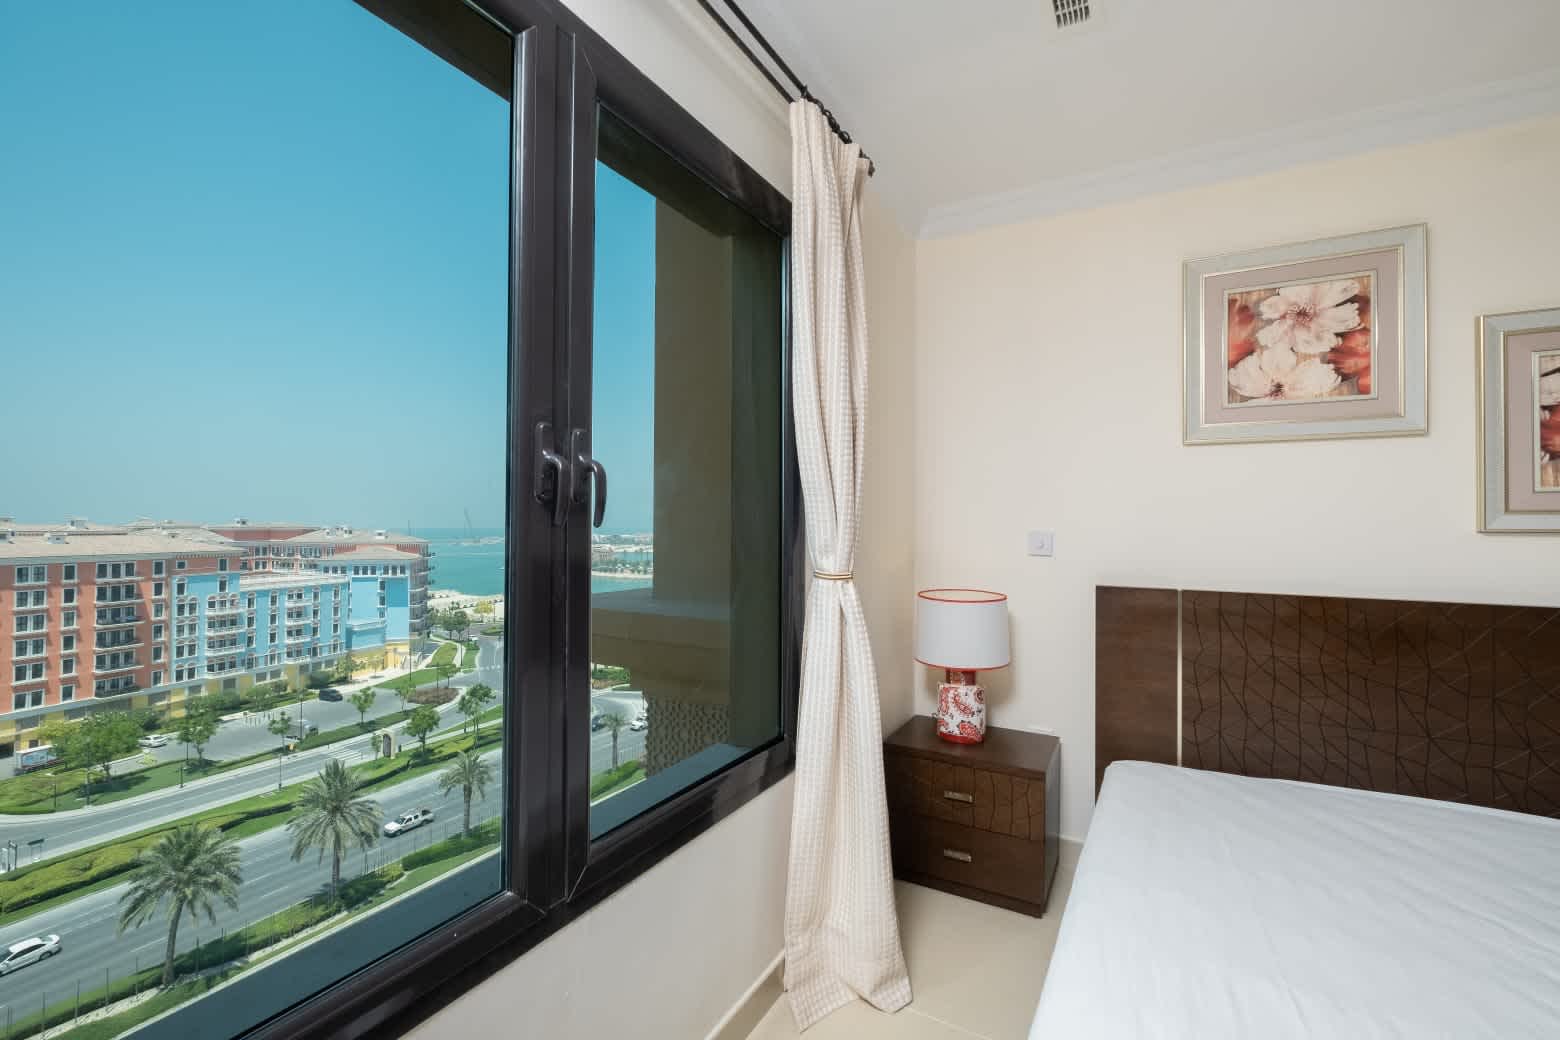 25 Spaces Real Estate - Porto Arabia - Properties for Rent - 16 March 2023 refWAPT258065 (7)